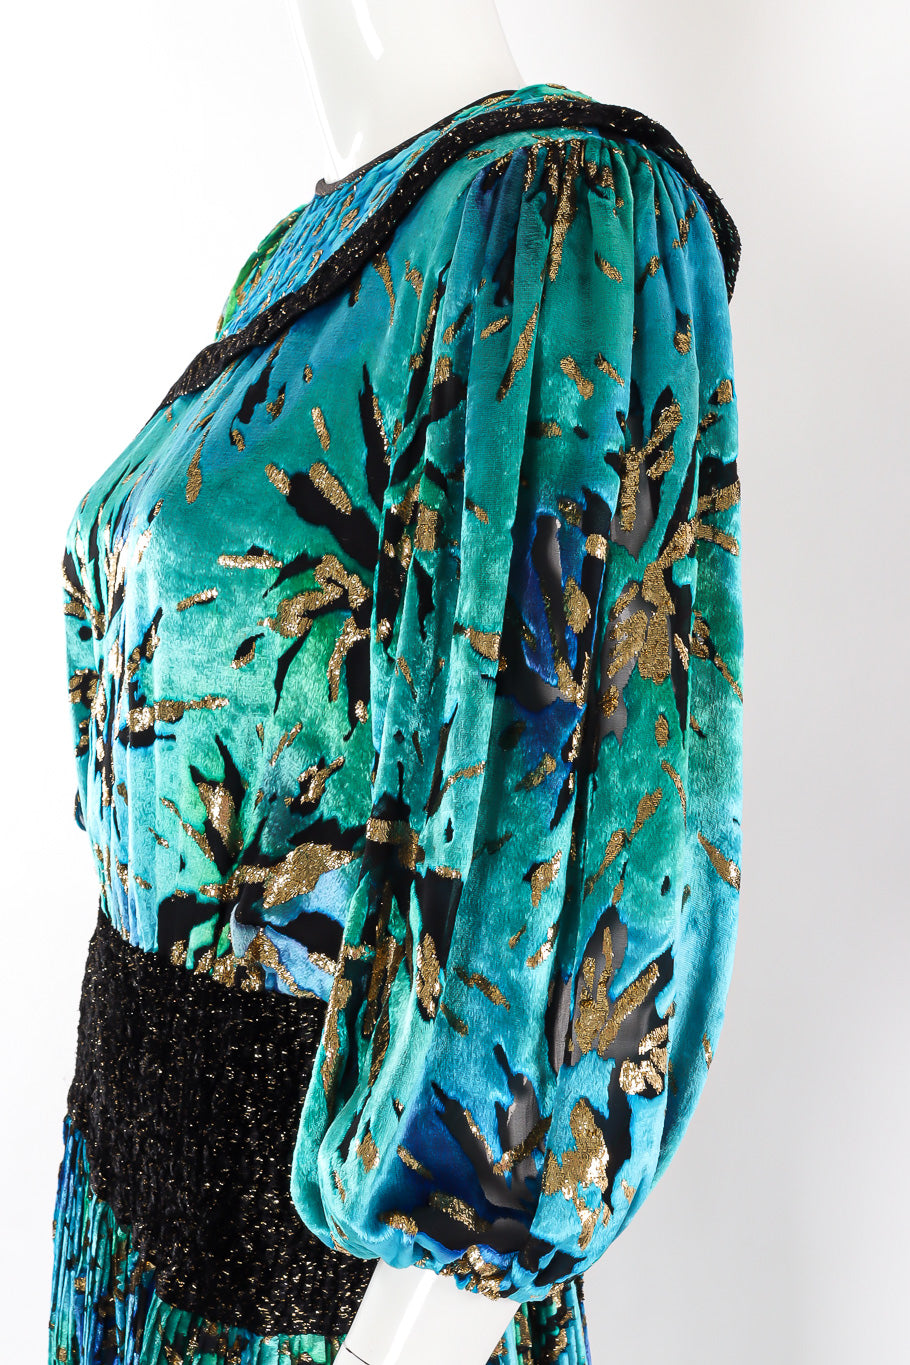 Multi-printed silk limited edition dress by Diane Freis side view on mannequin @recessla